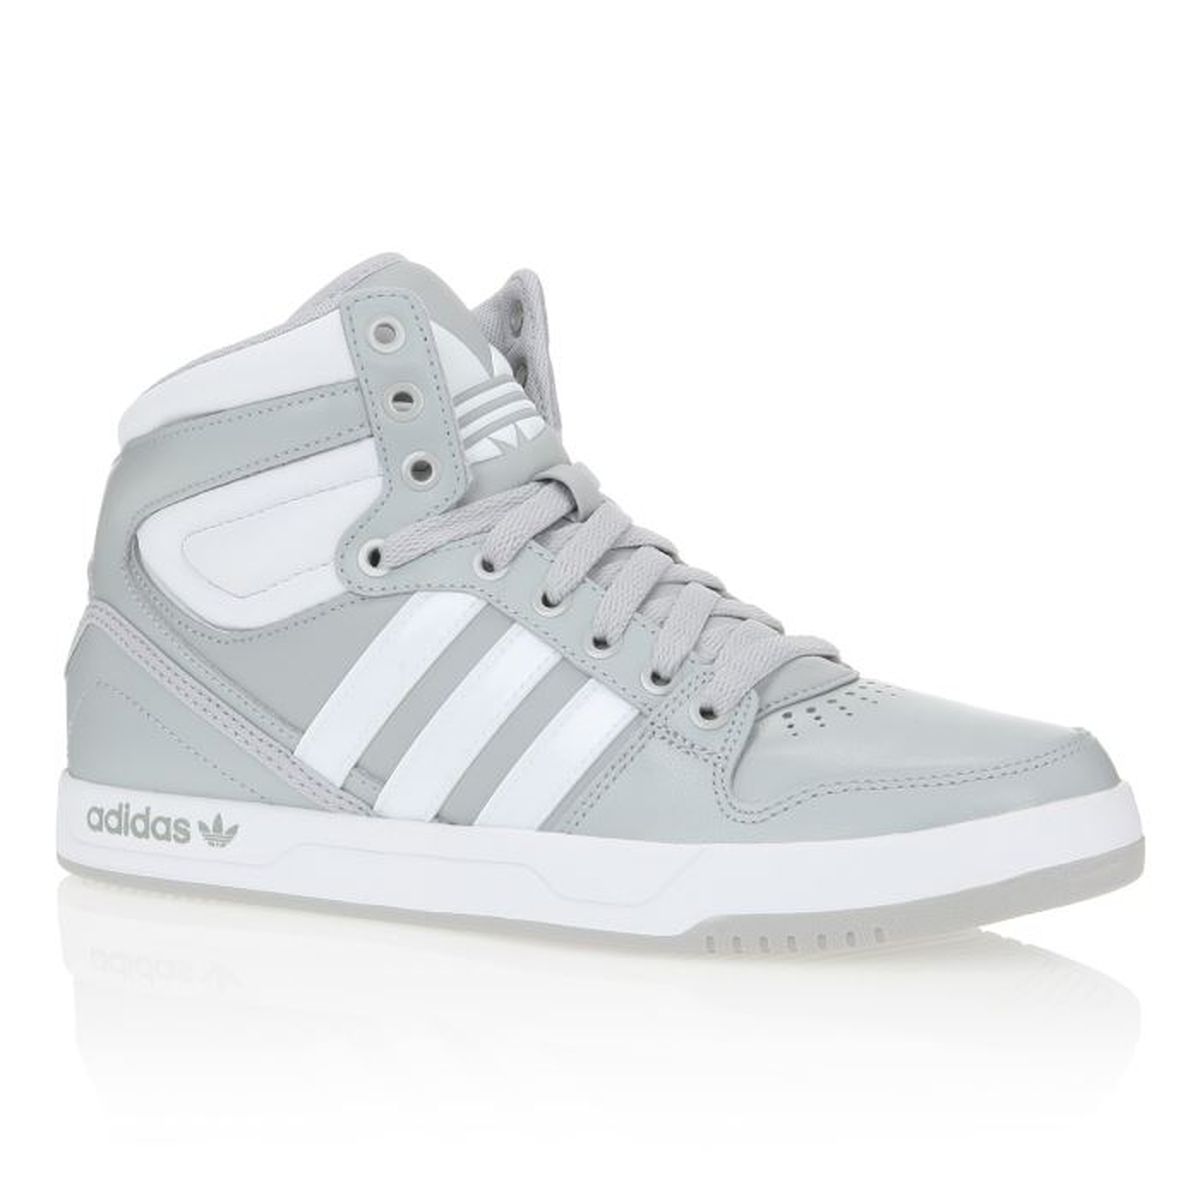 chaussure adidas montant